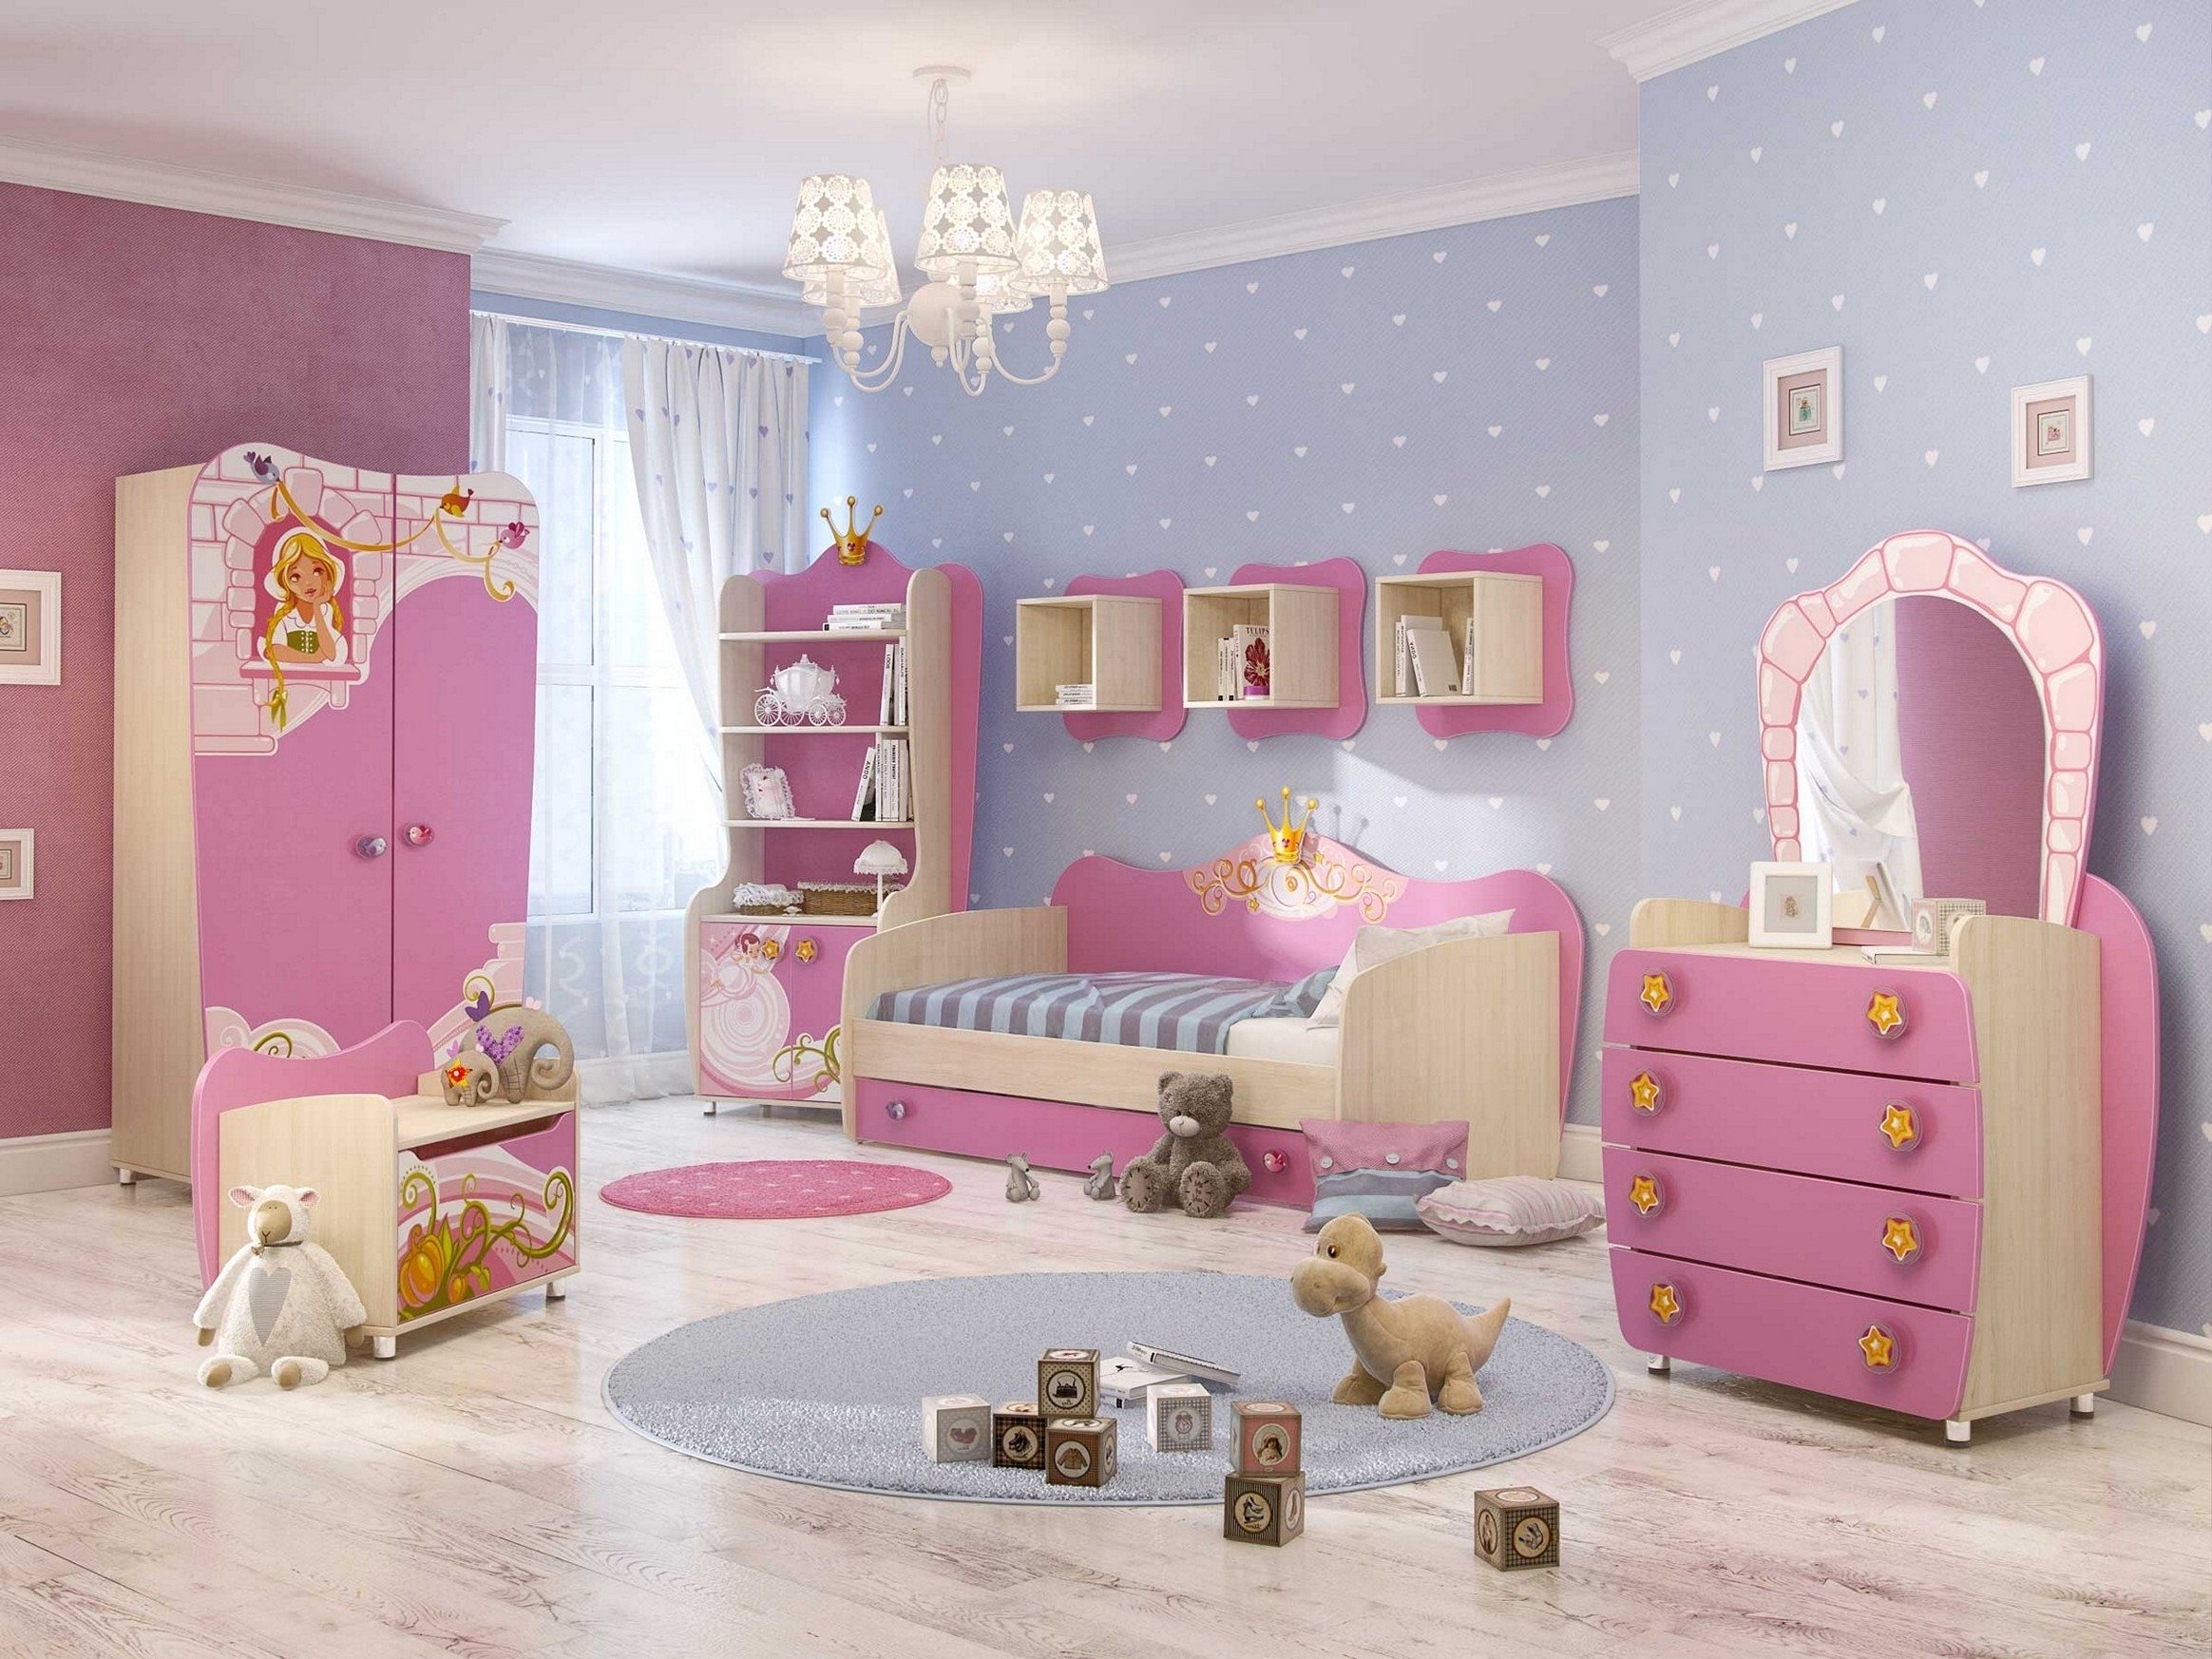 10 Wonderful Little Girl Room Decorating Ideas brilliant ideas of bedroom awesome little girl bedroom ideas with 2022